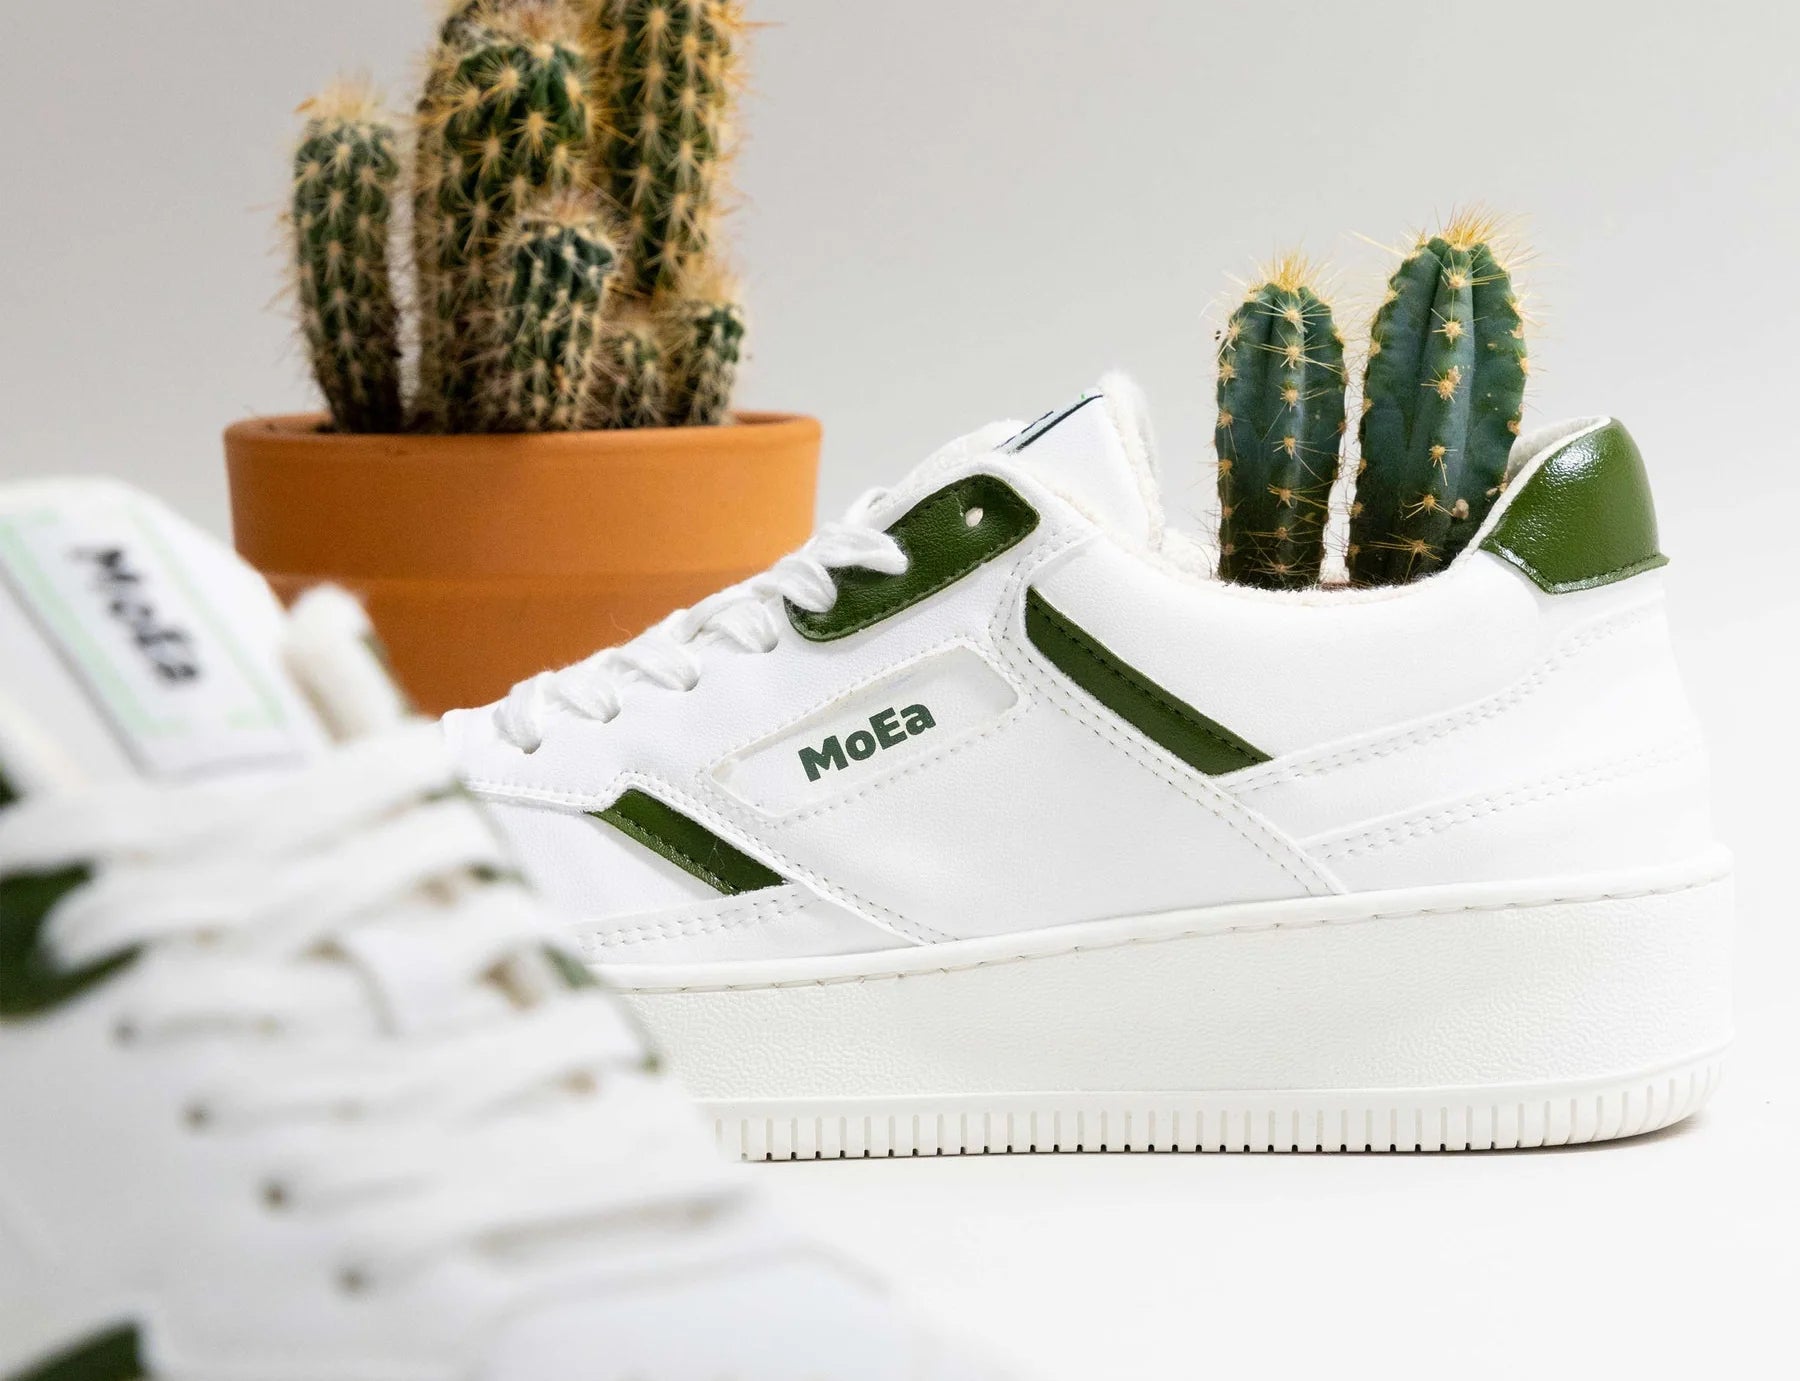 A pair of white cactus leather sneakers are arranged with cactus plants